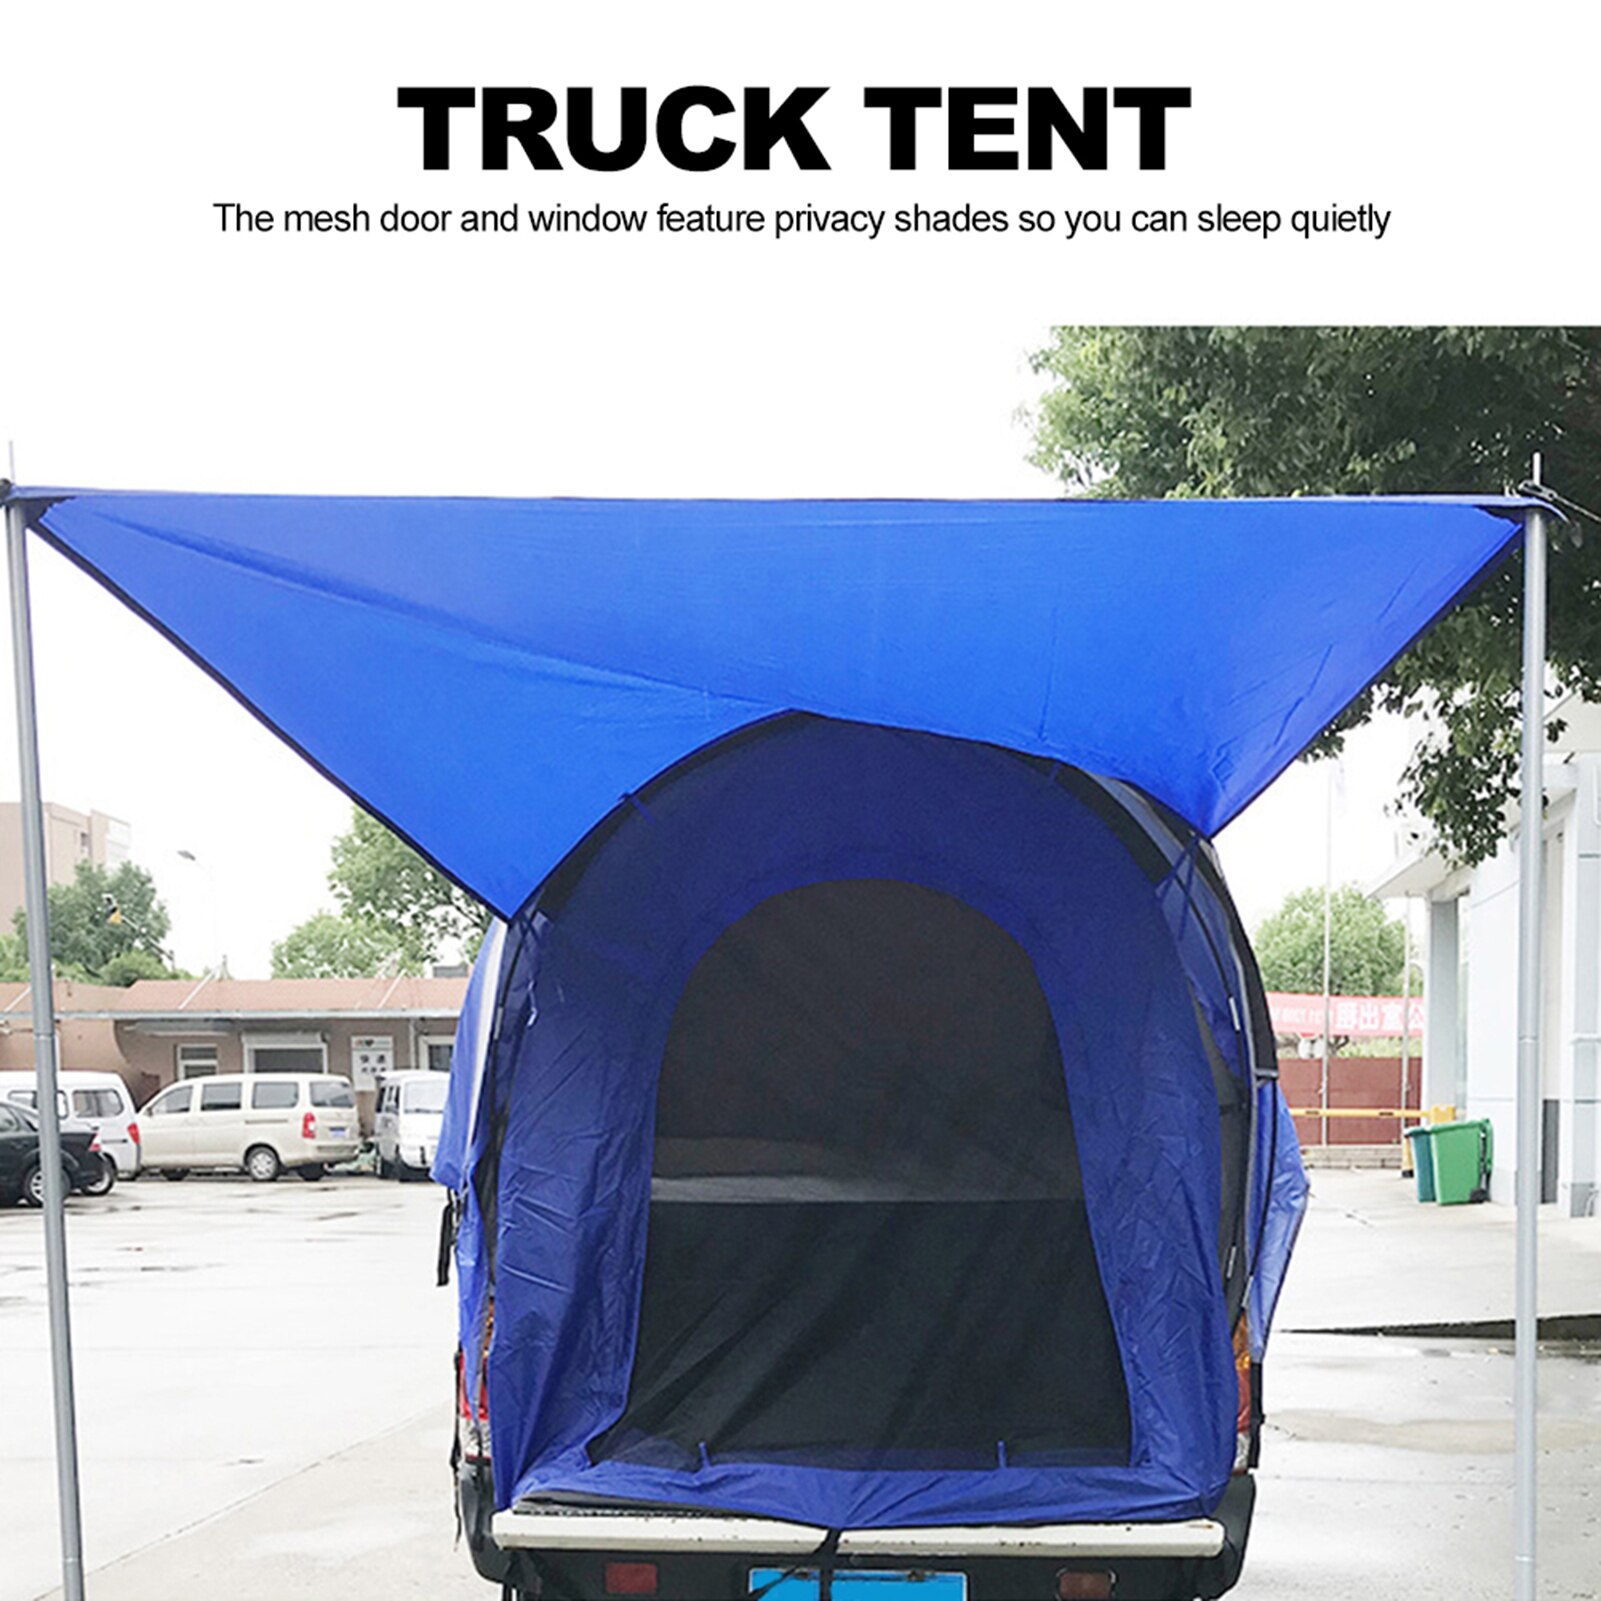 Cheap Goat Tents Pickup Truck Tent Waterproof PU2000 Double Layer Truck Bed Tents 190T Flame Retardant Polyester Tent For 5 6.5Ft Cars Trucks   